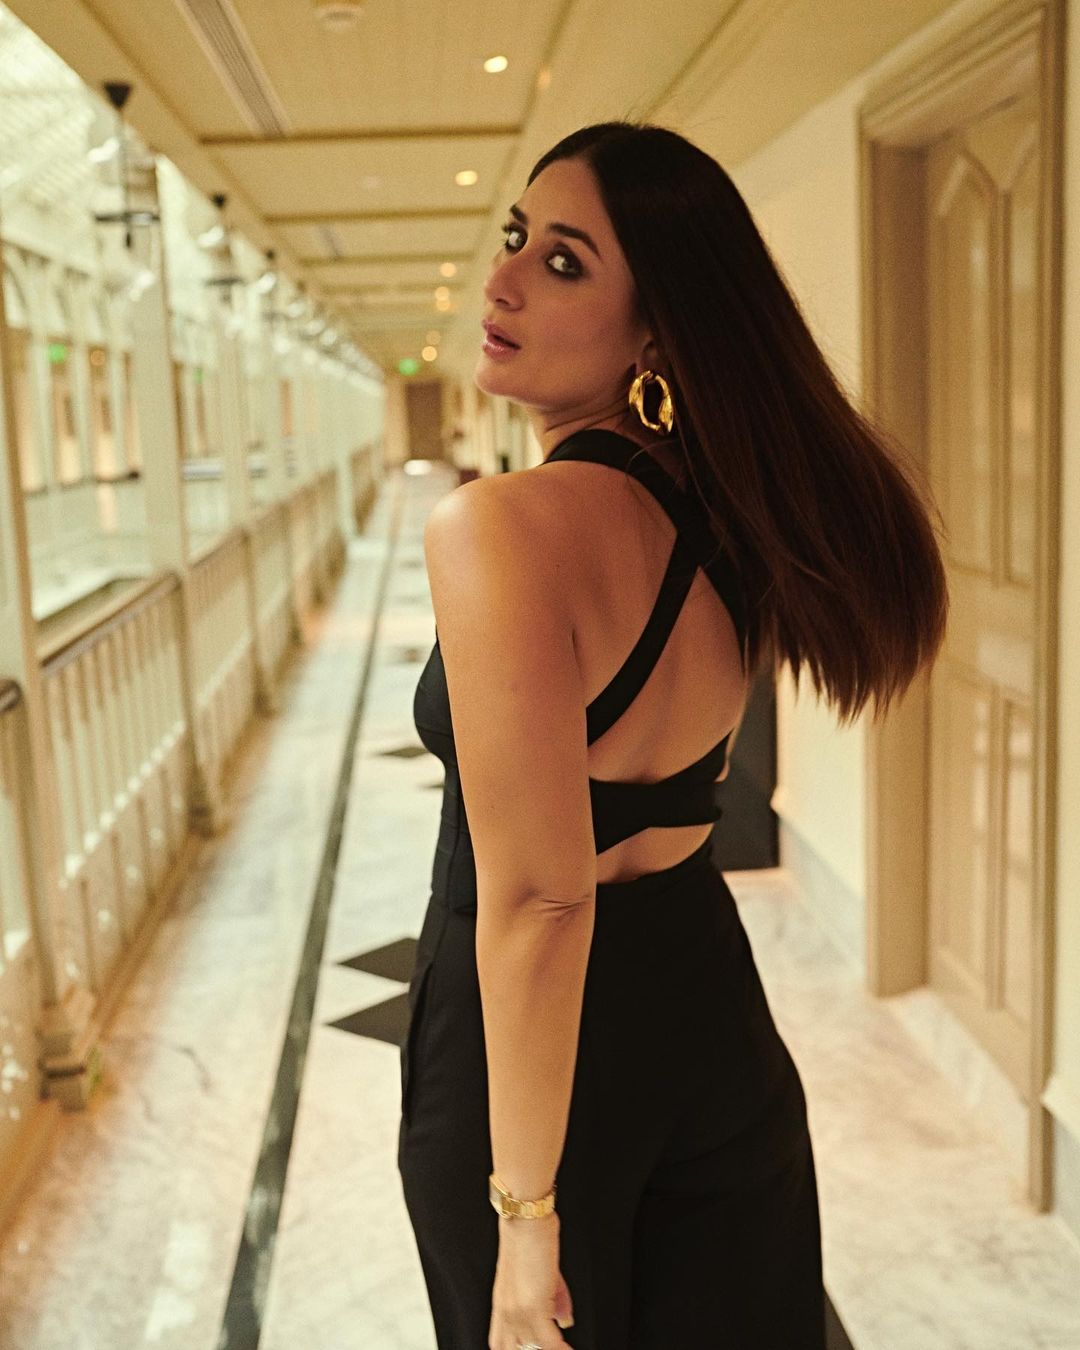 Kareena Kapoor Khan In Black Jumpsuit Is The Very Definition Of Classy And Chic